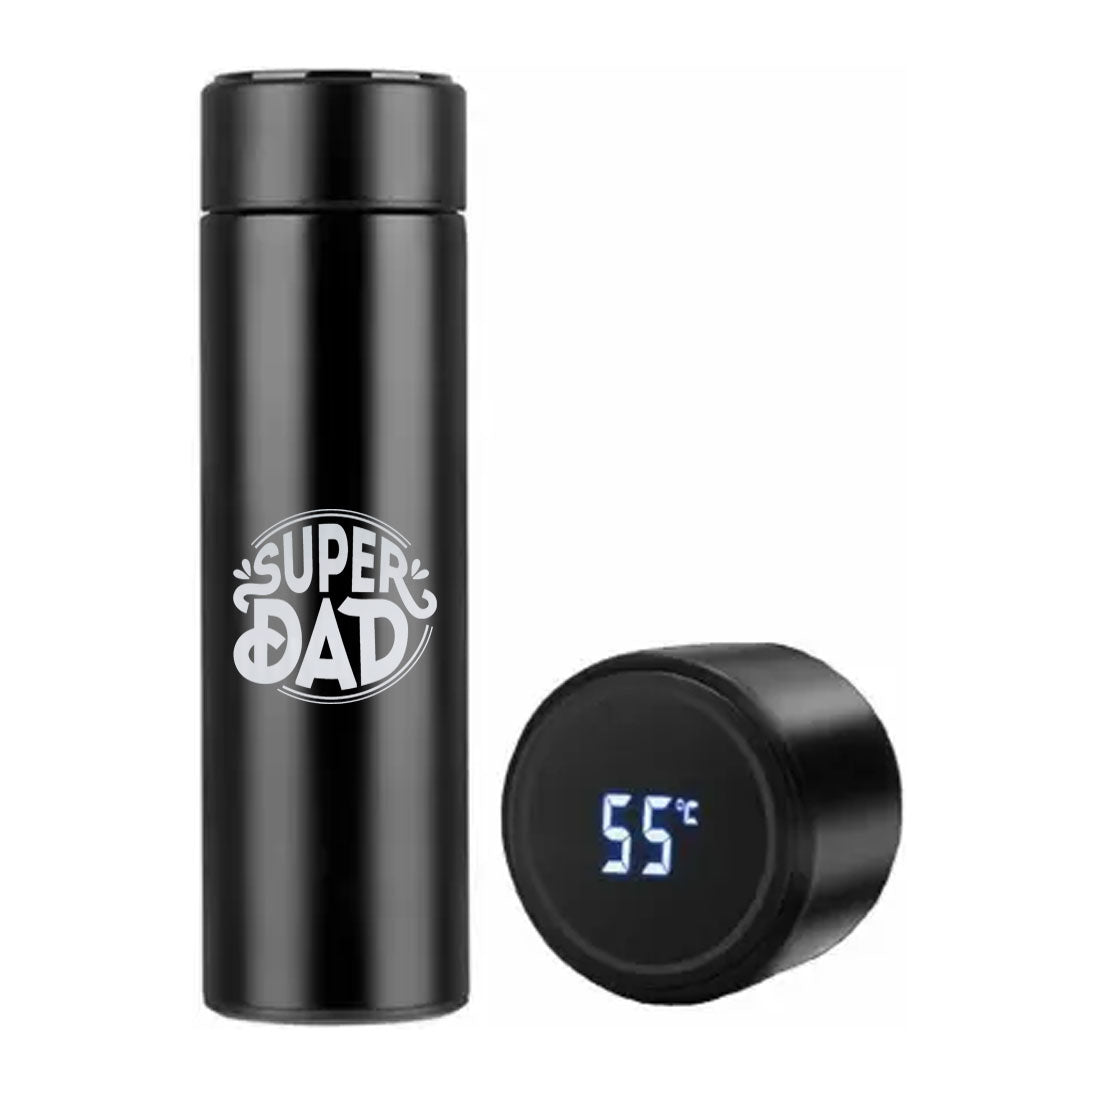 Unique Gifts for Dad Engraved Tea Coffee Flask - Super Dad